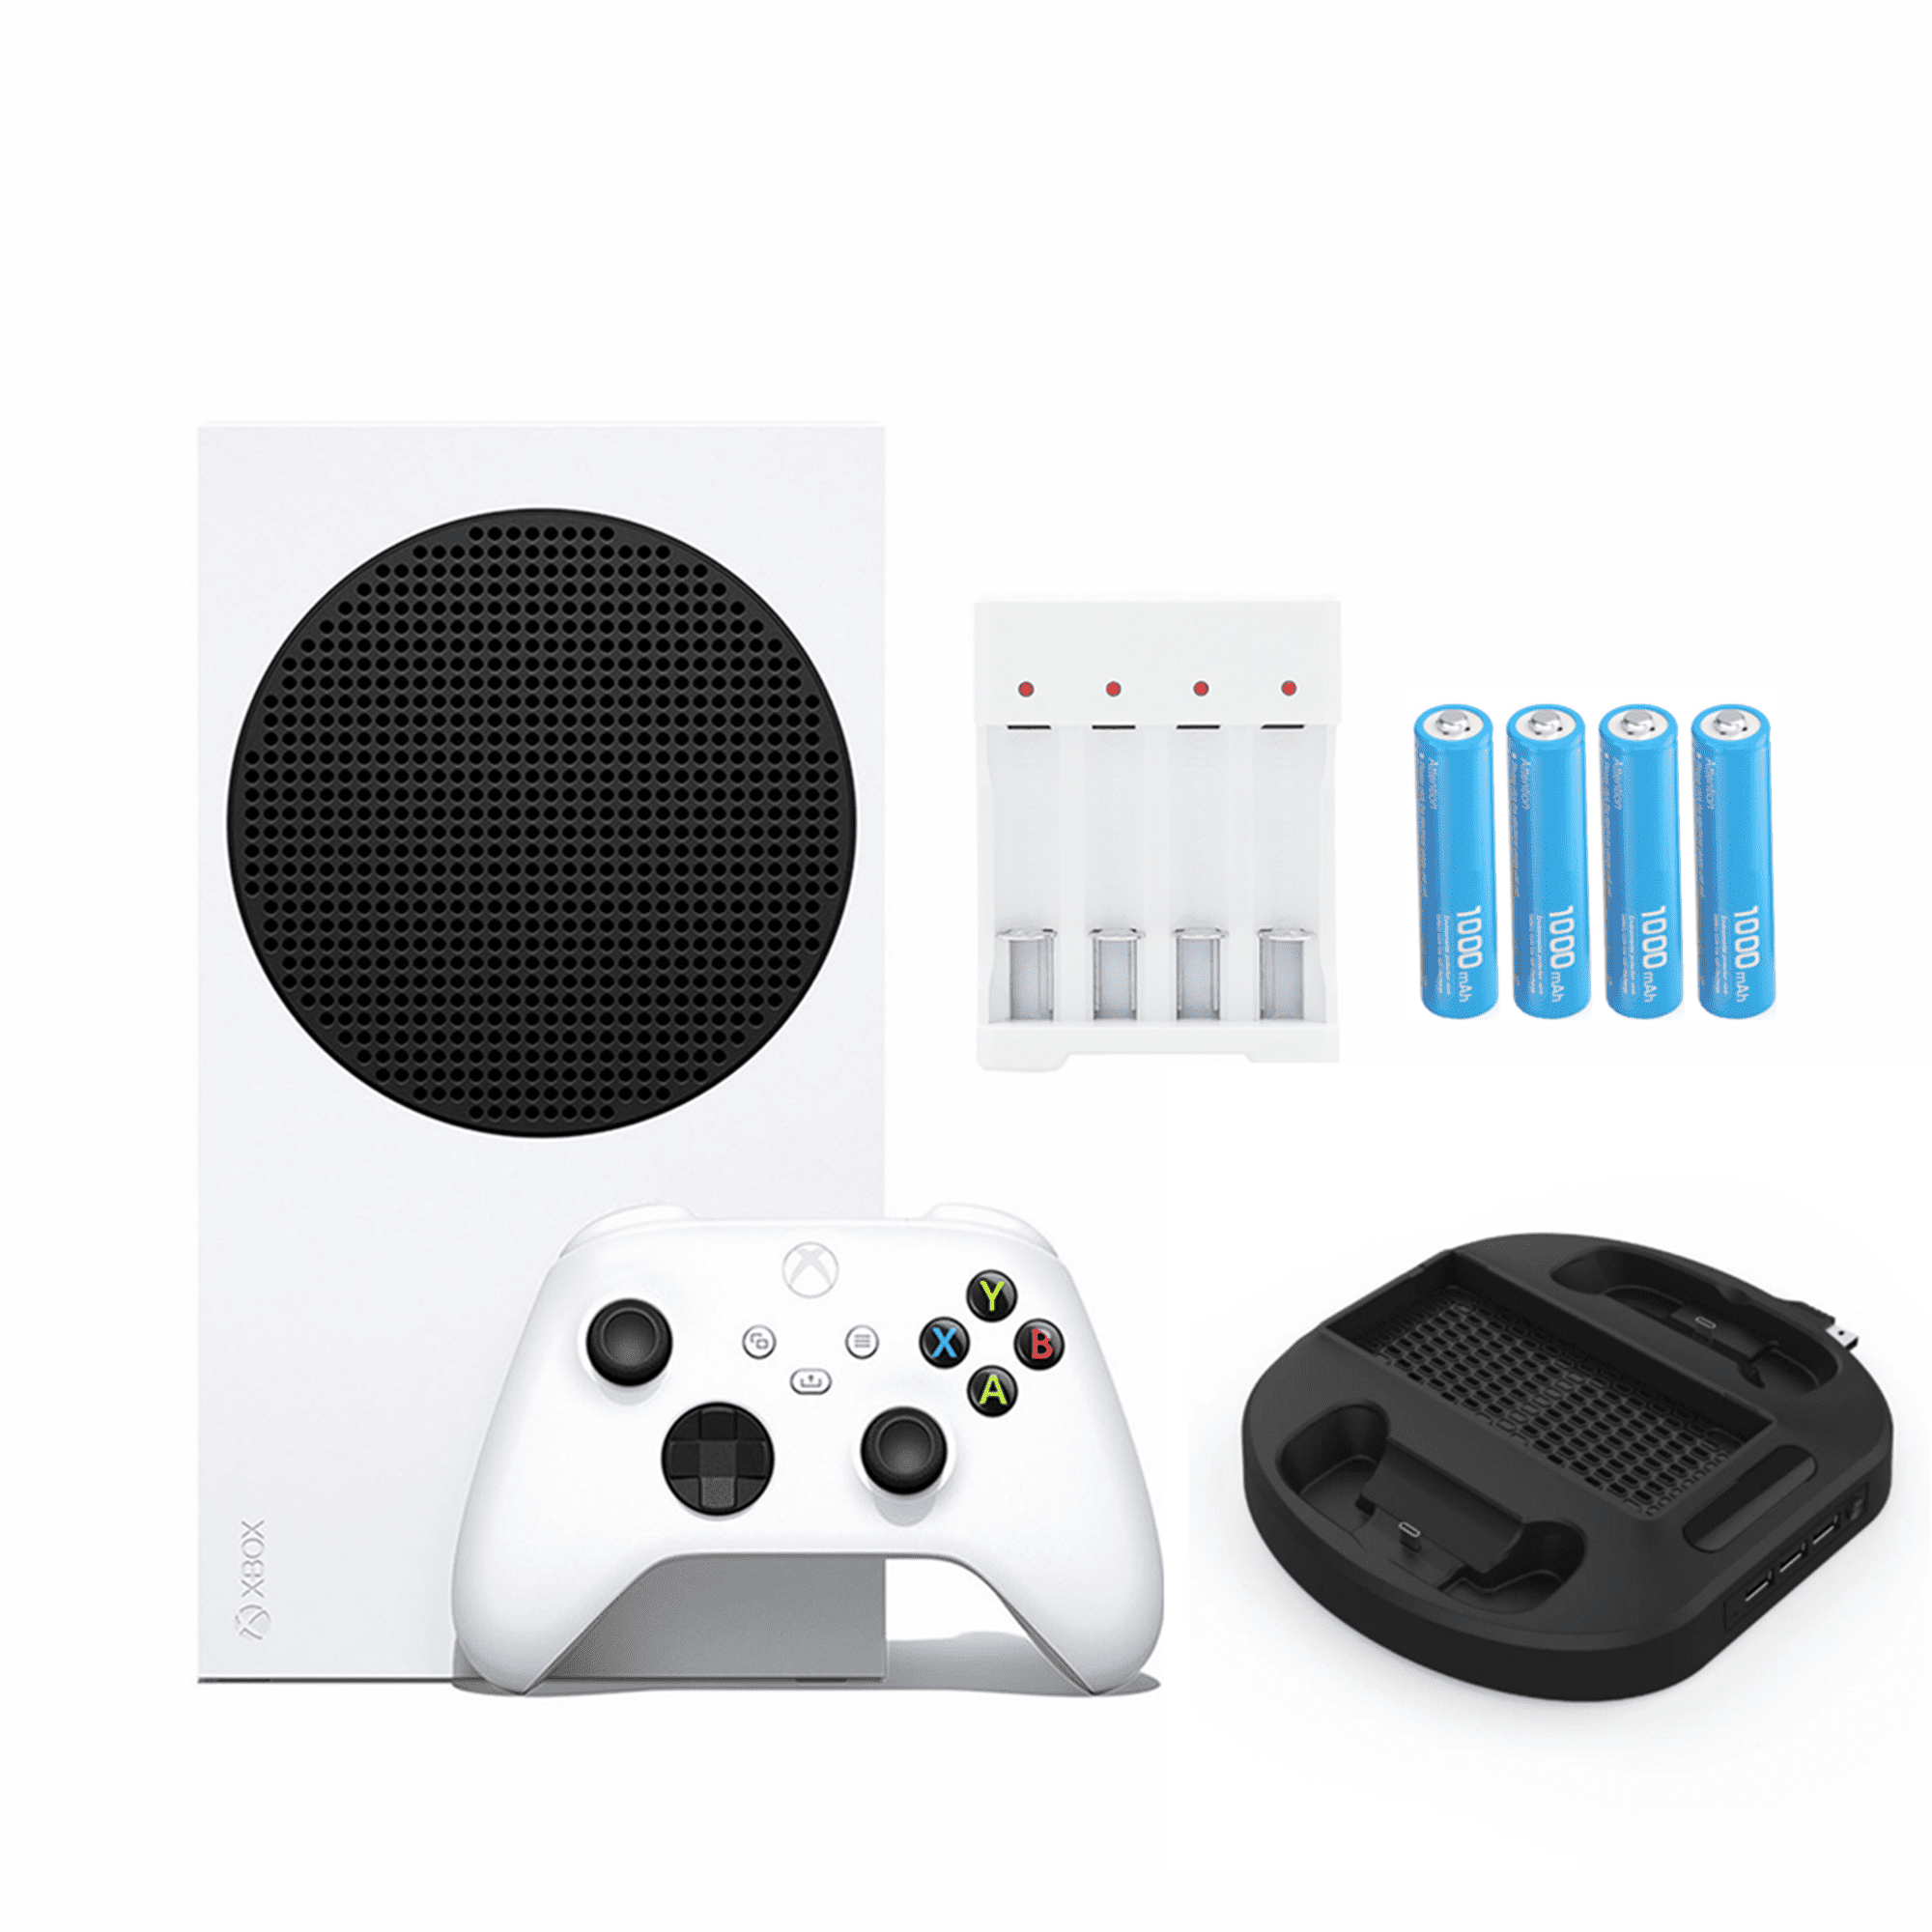 Bewust worden Retoucheren Instituut Microsoft Xbox Series S All-Digital 512 GB Console White (Disc-Free  Gaming), One Xbox Wireless Controller, 1440p Resolution, Up to 120FPS,  Wi-Fi, w/a Cooling Fan, Batteries and more - Walmart.com